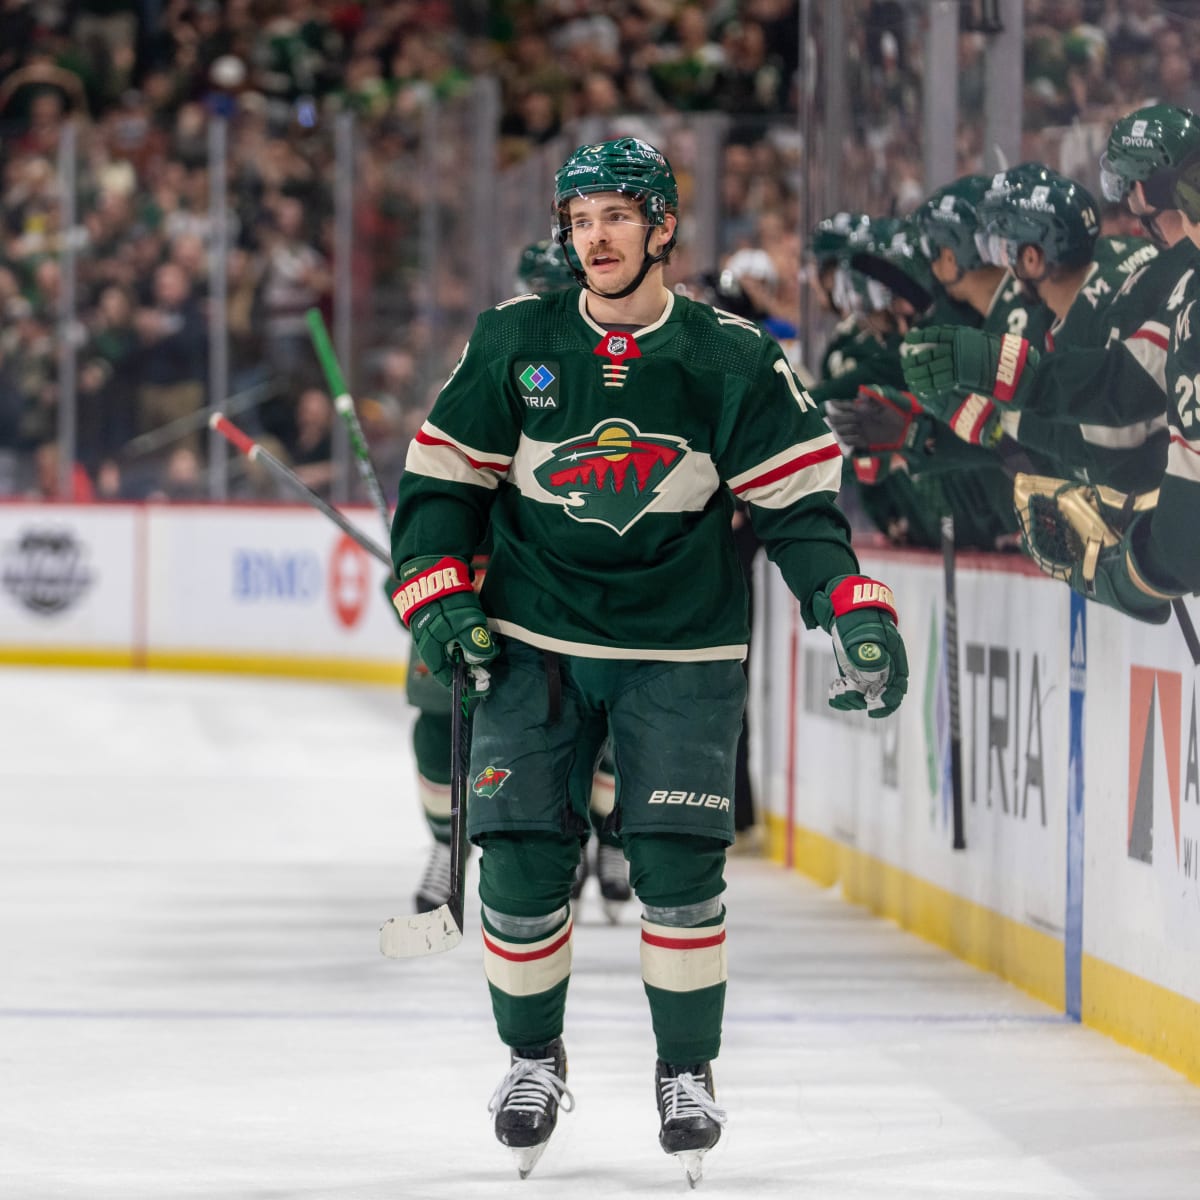 Wild-Anaheim game preview: Sam Steel faces off against former team